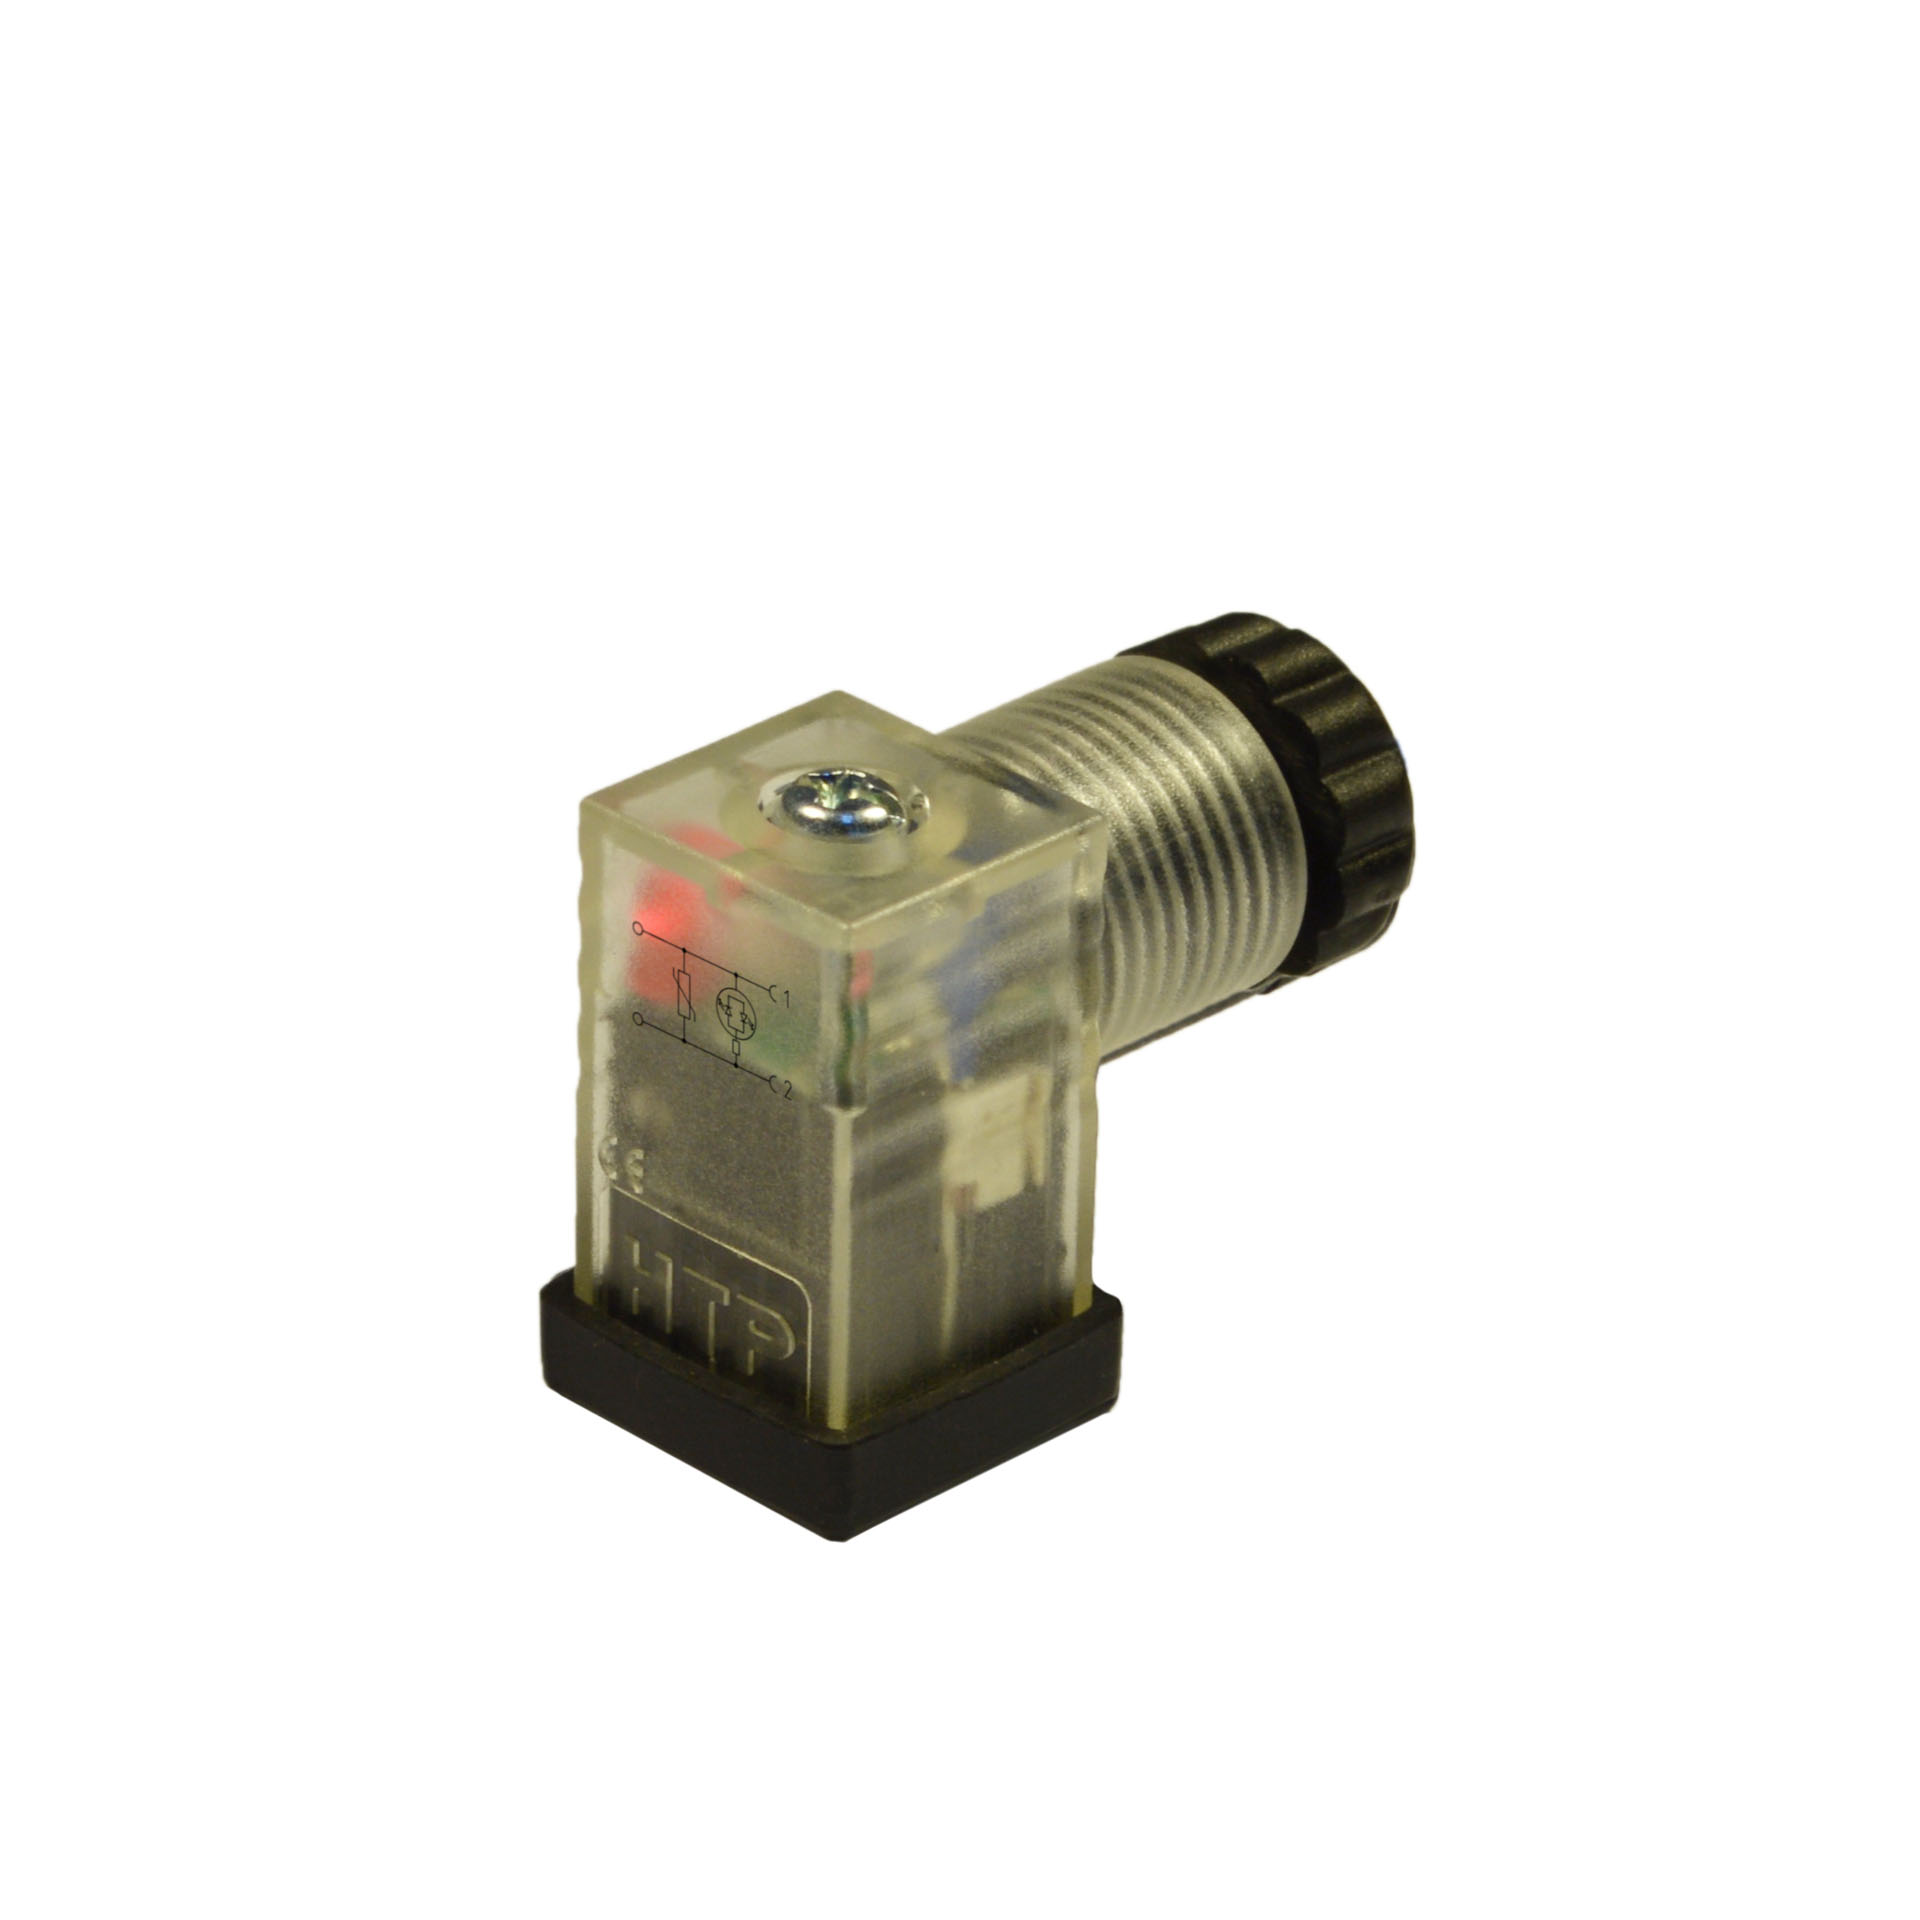 Industrial standard(typeC)field attachable,2p+PE(h.6),red LED+vdr,24VAC/DC,PG7